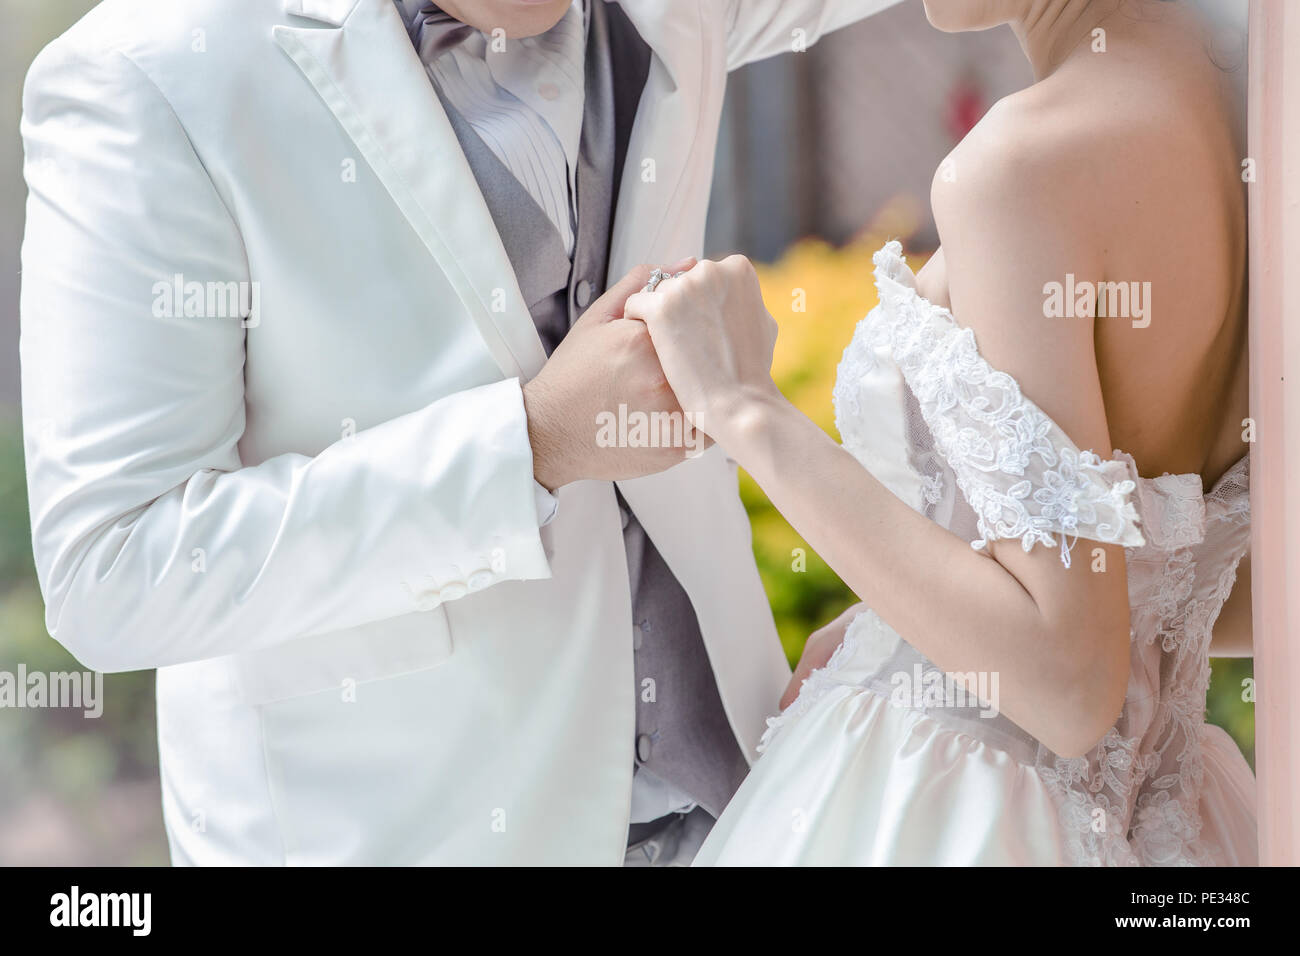 Wedding couple holding hands a symbol of love and marriage. Stock Photo